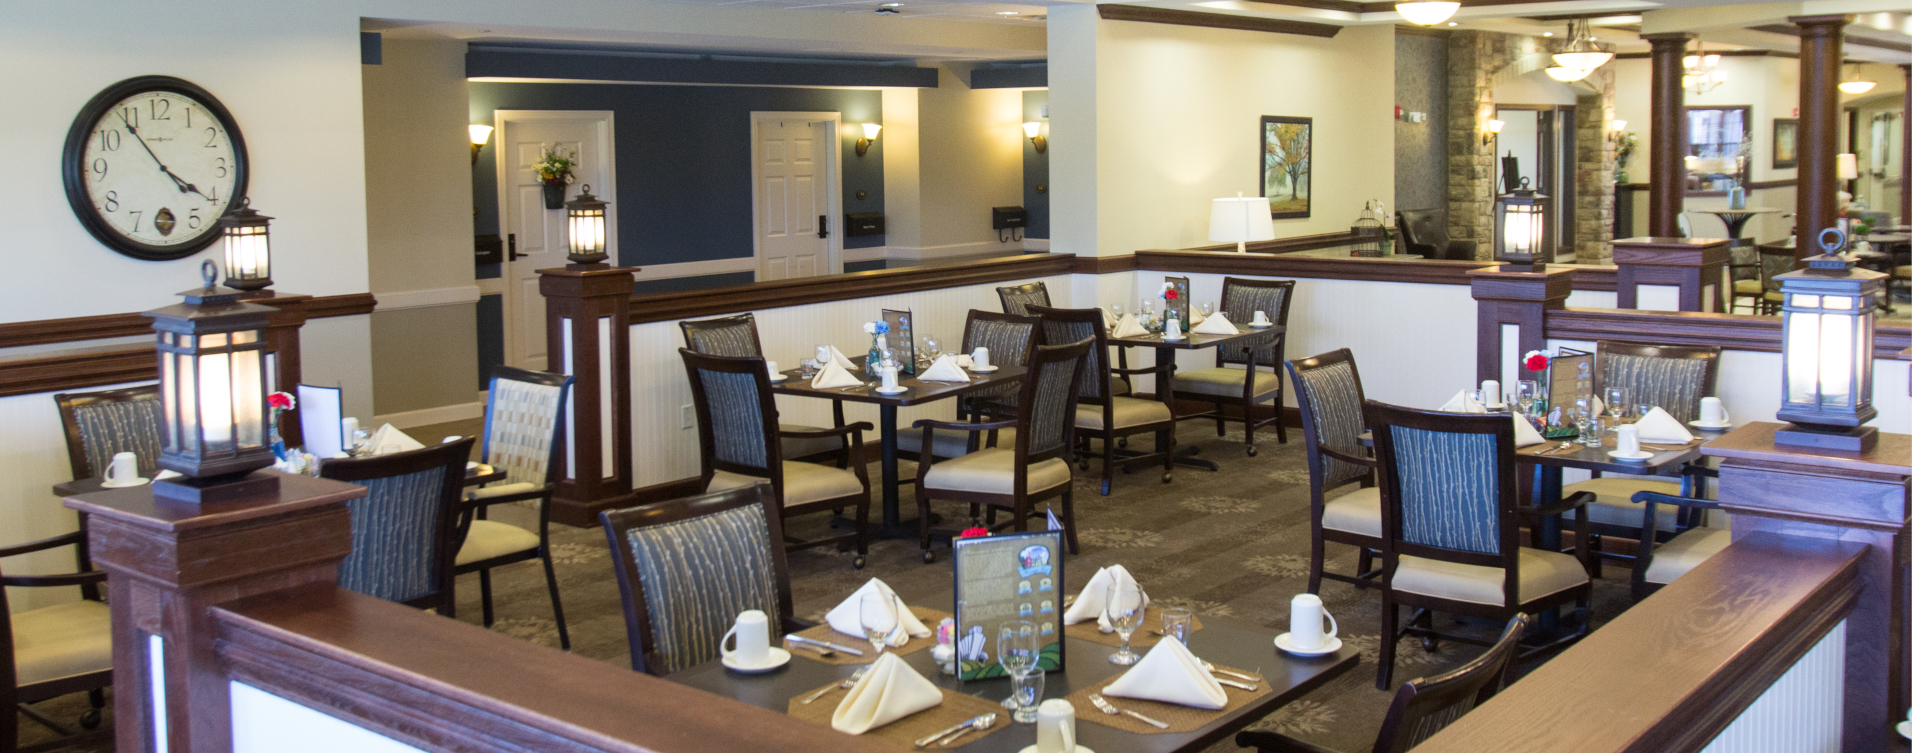 Food is best when shared with friends in the dining room at Bickford of Tinley Park